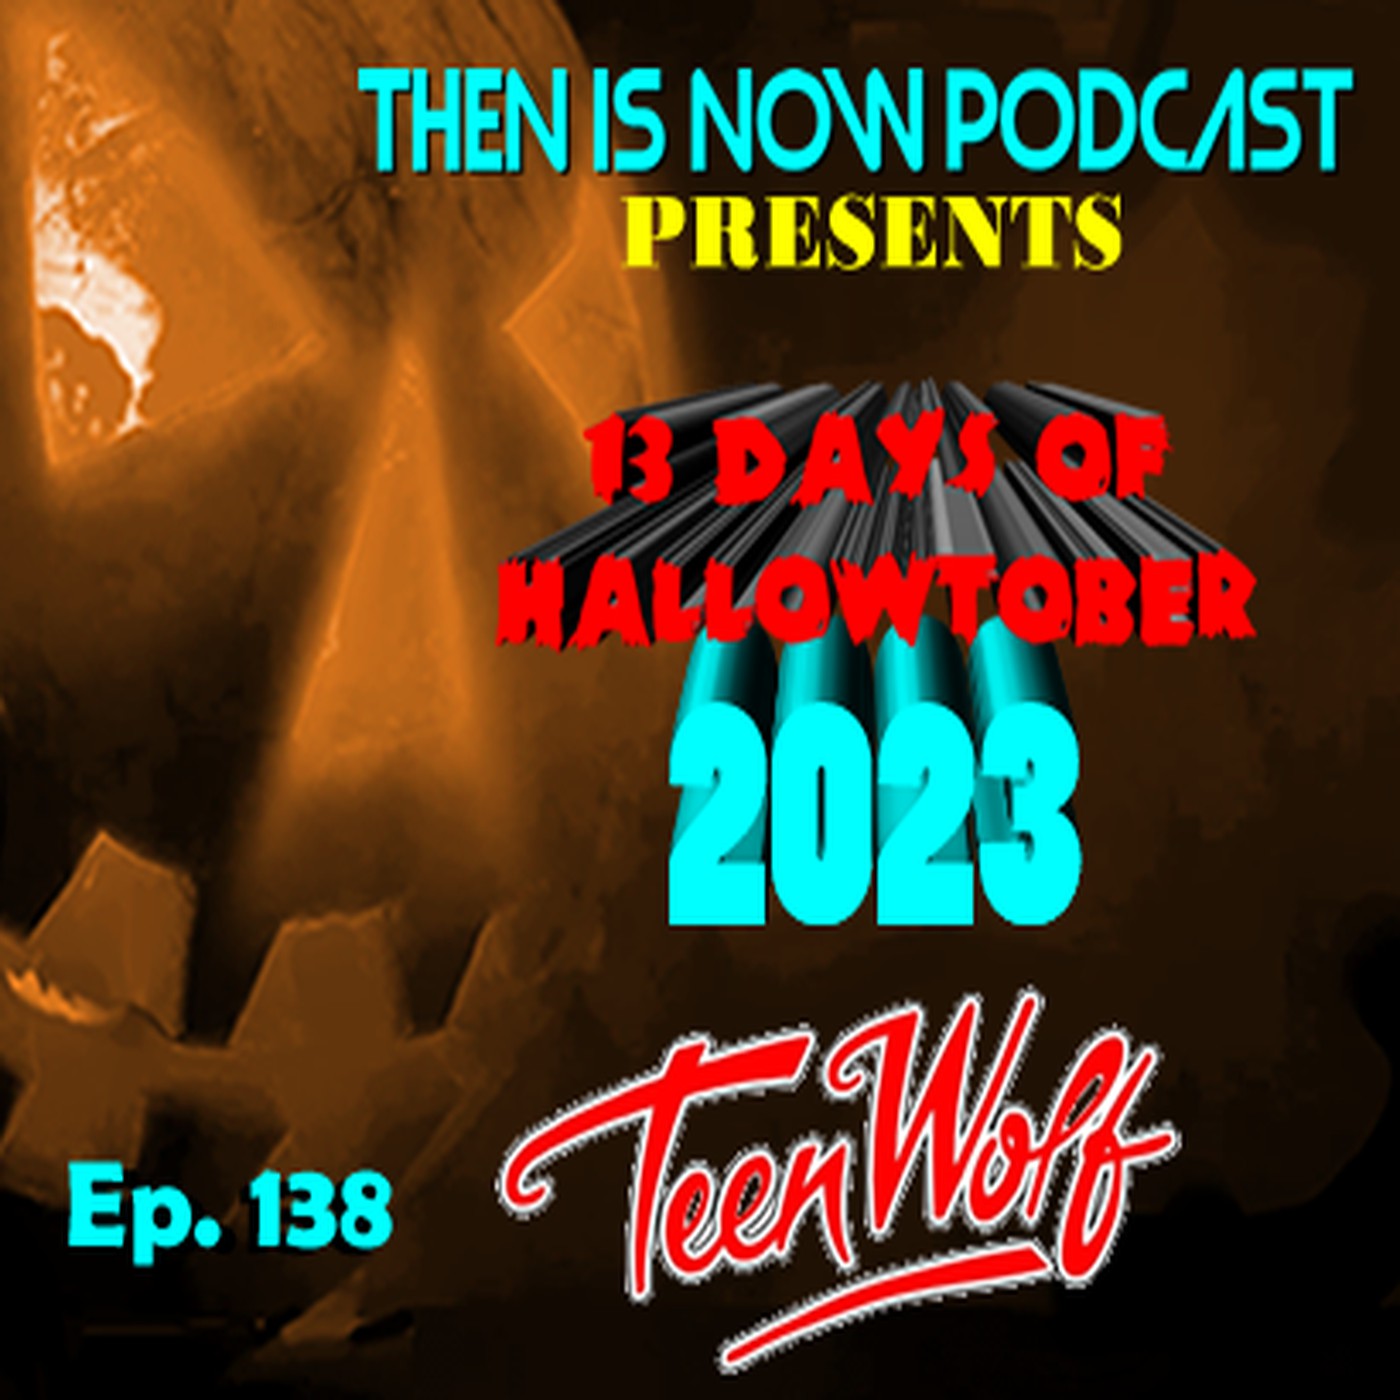 Then Is Now Ep. 138 - 13 Days of Hallowtober 2023 - Teen Wolf (1985)